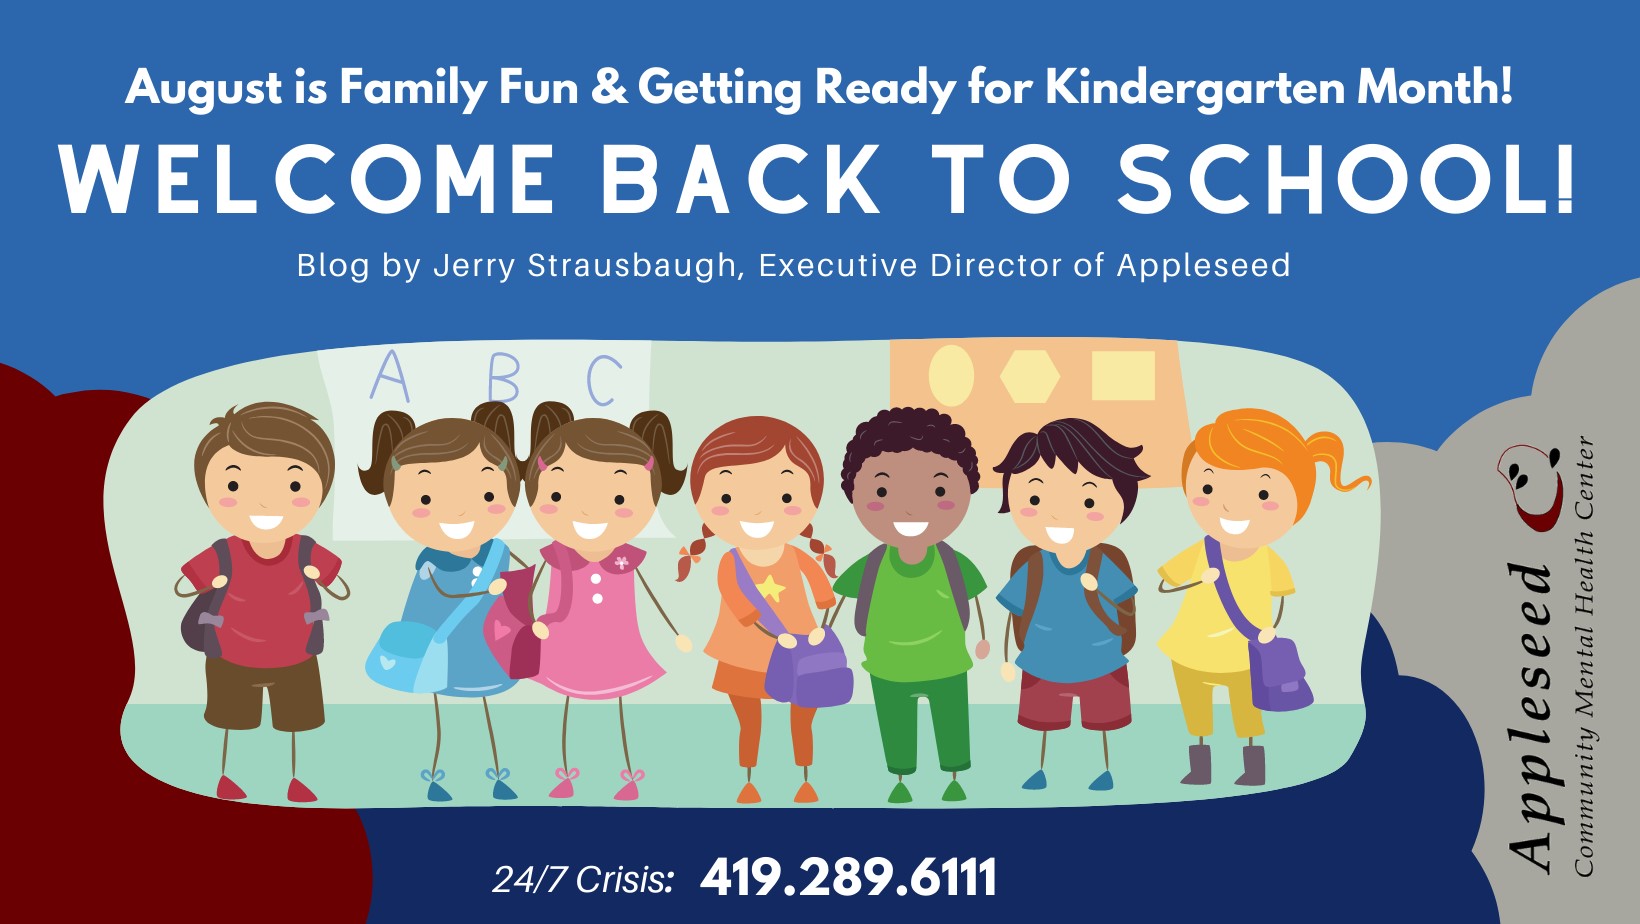 August is Family Fun Month and Getting Ready for Kindergarten Month